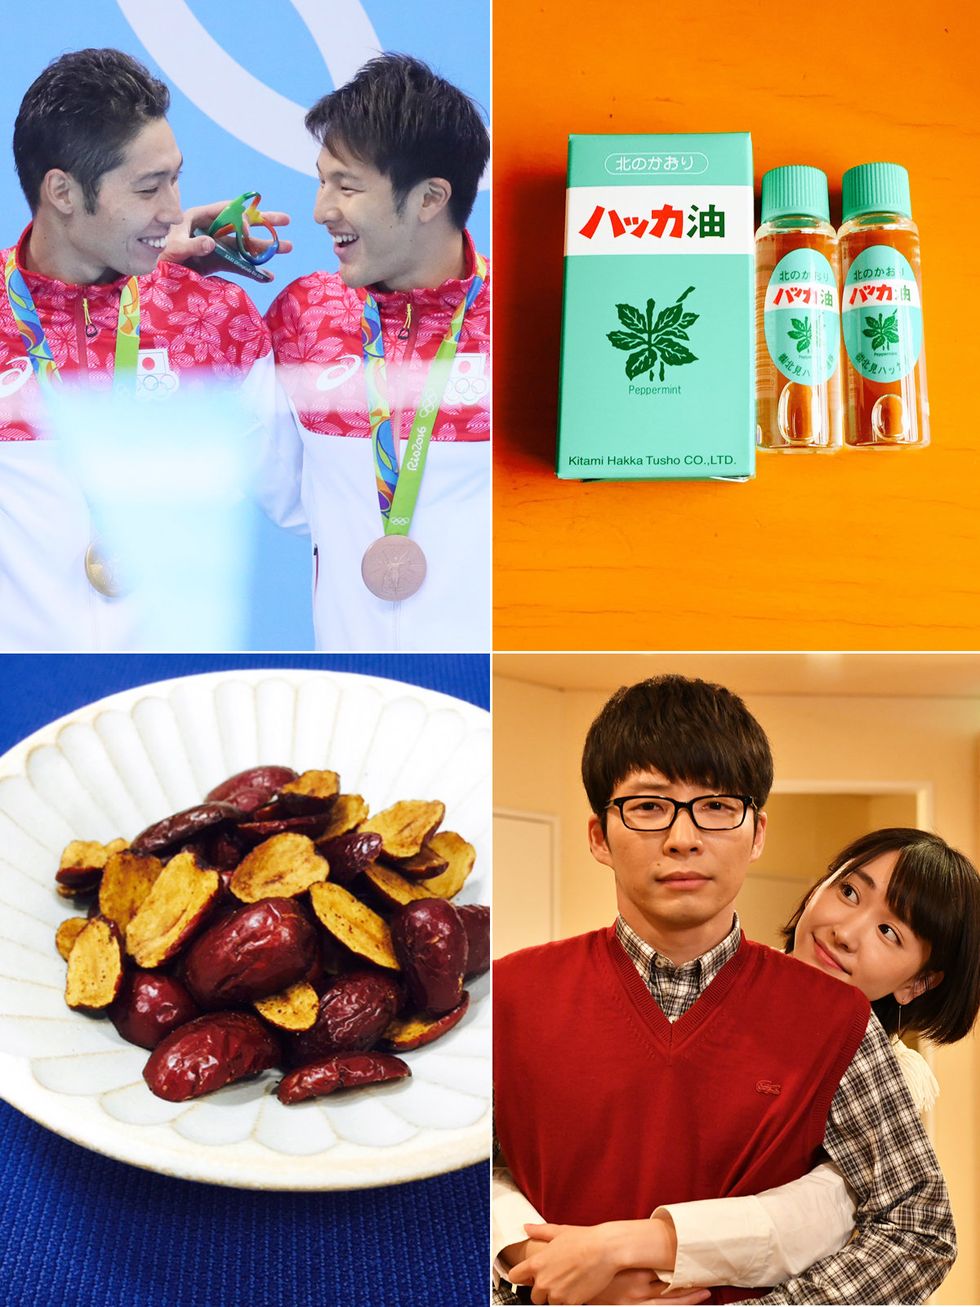 Face, Nose, Glasses, Sharing, Collage, Dish, Ingredient, Love, Sweetness, Produce, 